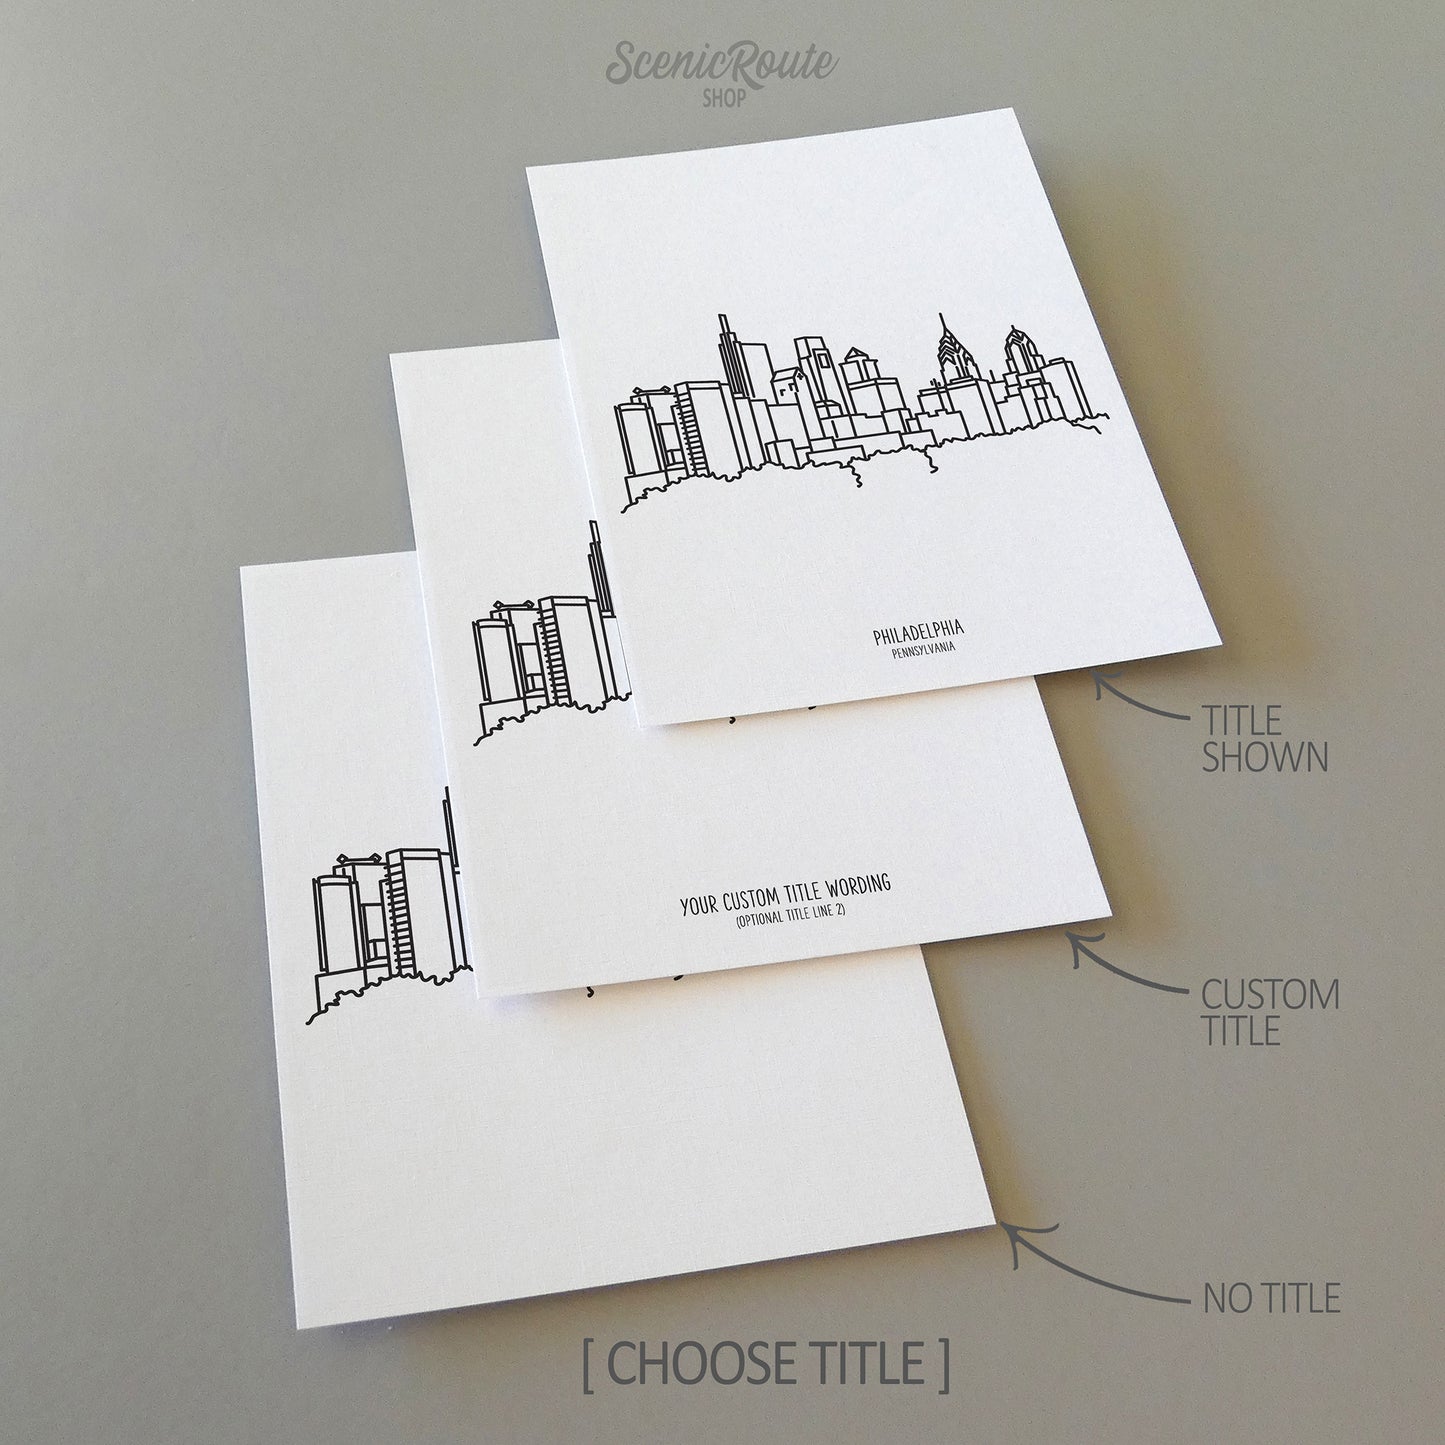 Three line art drawings of the Philadelphia Pennsylvania Skyline on white linen paper with a gray background. The pieces are shown with title options that can be chosen and personalized.